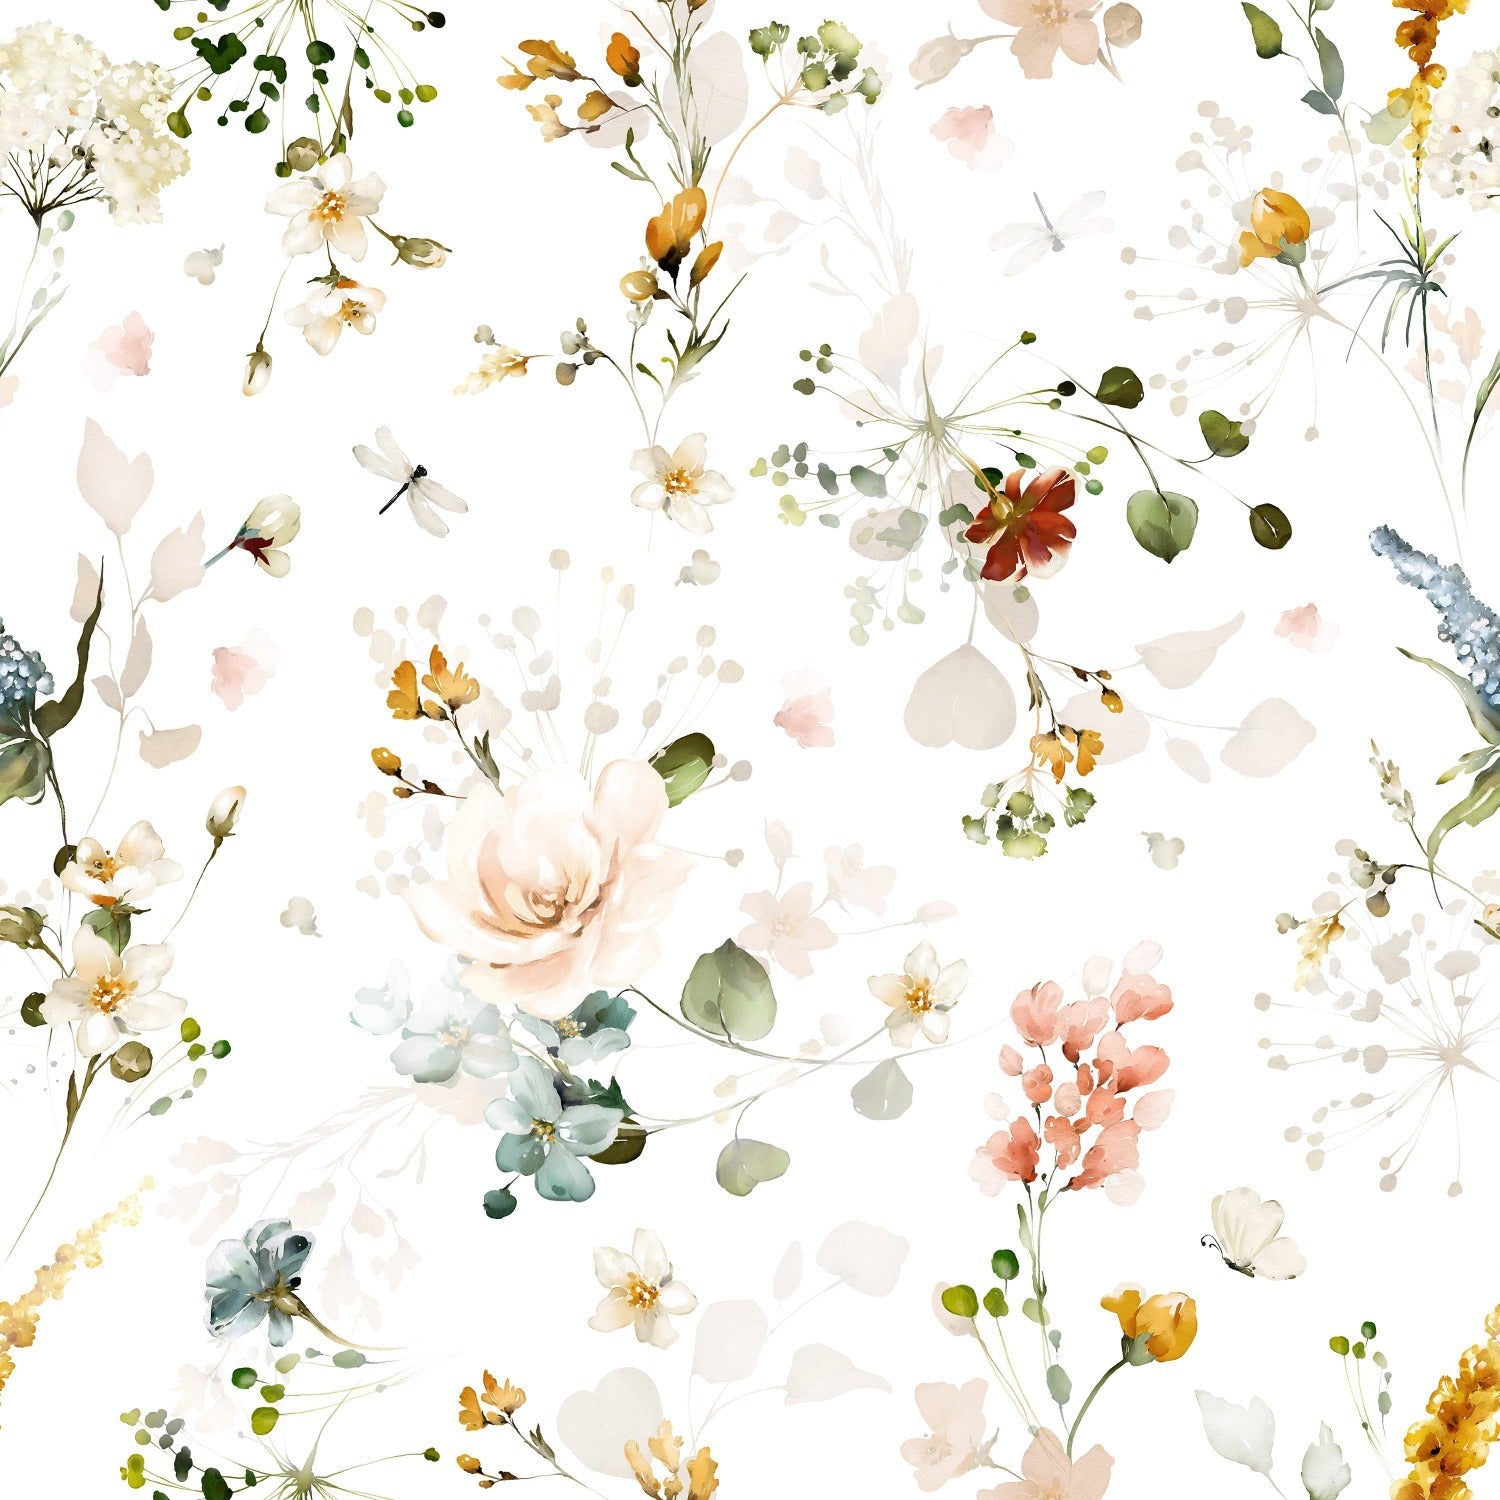 A close-up view of Fiori Wallpaper, displaying a detailed and vibrant array of watercolor flowers and foliage in soft hues of pink, yellow, and green, intermingled with delicate butterflies, creating a tranquil and naturalistic wall decor.